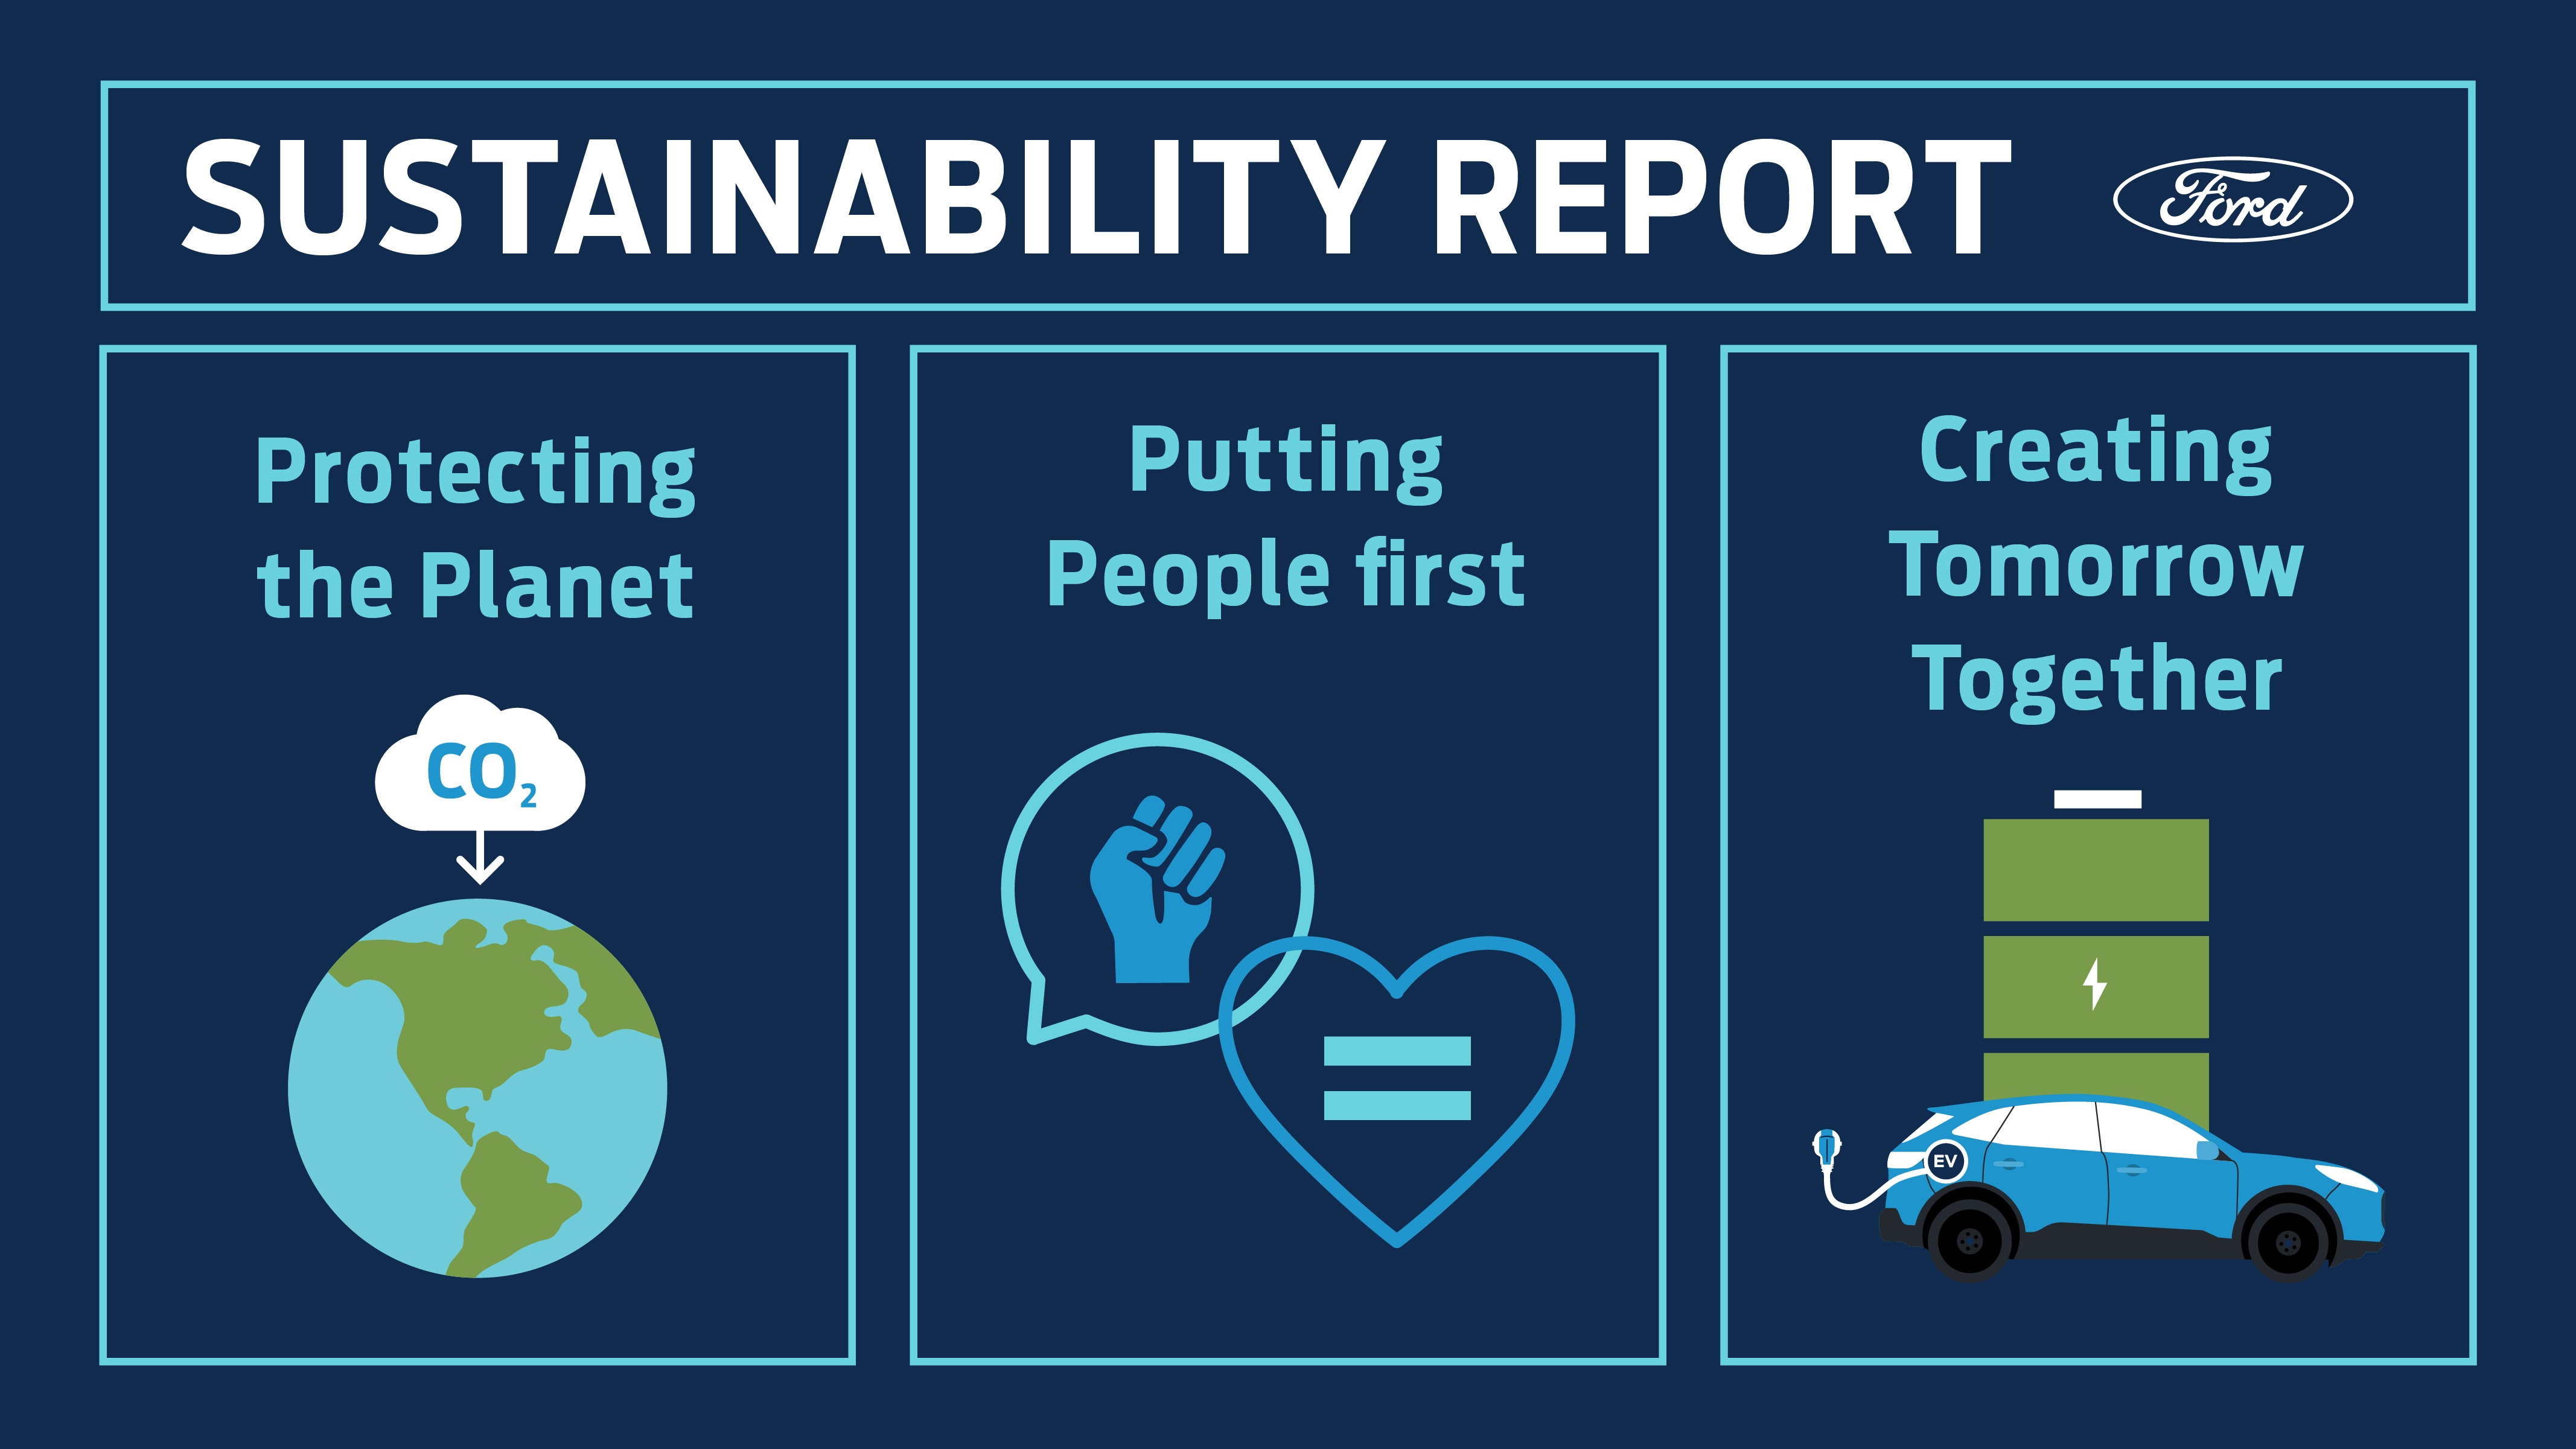 Ford Expands Climate Change Goals, Sets Target To Become Carbon Neutral By 2050